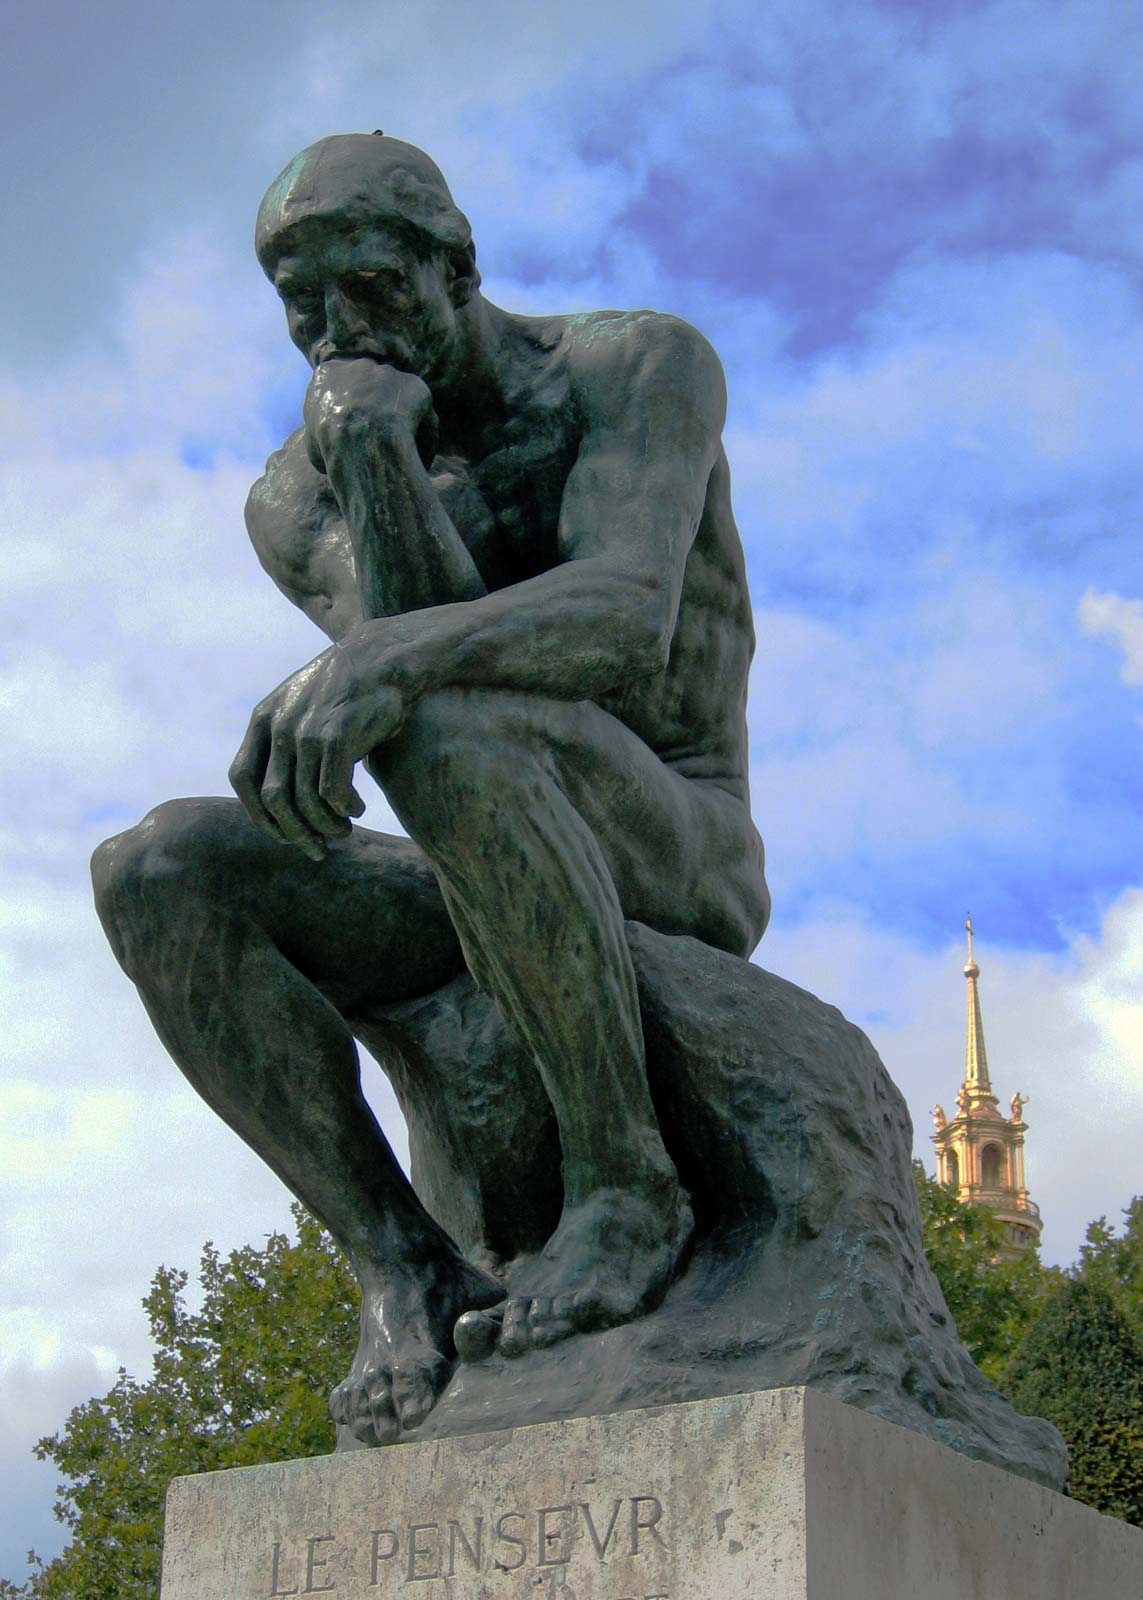 The Thinker. History, Description, & Facts